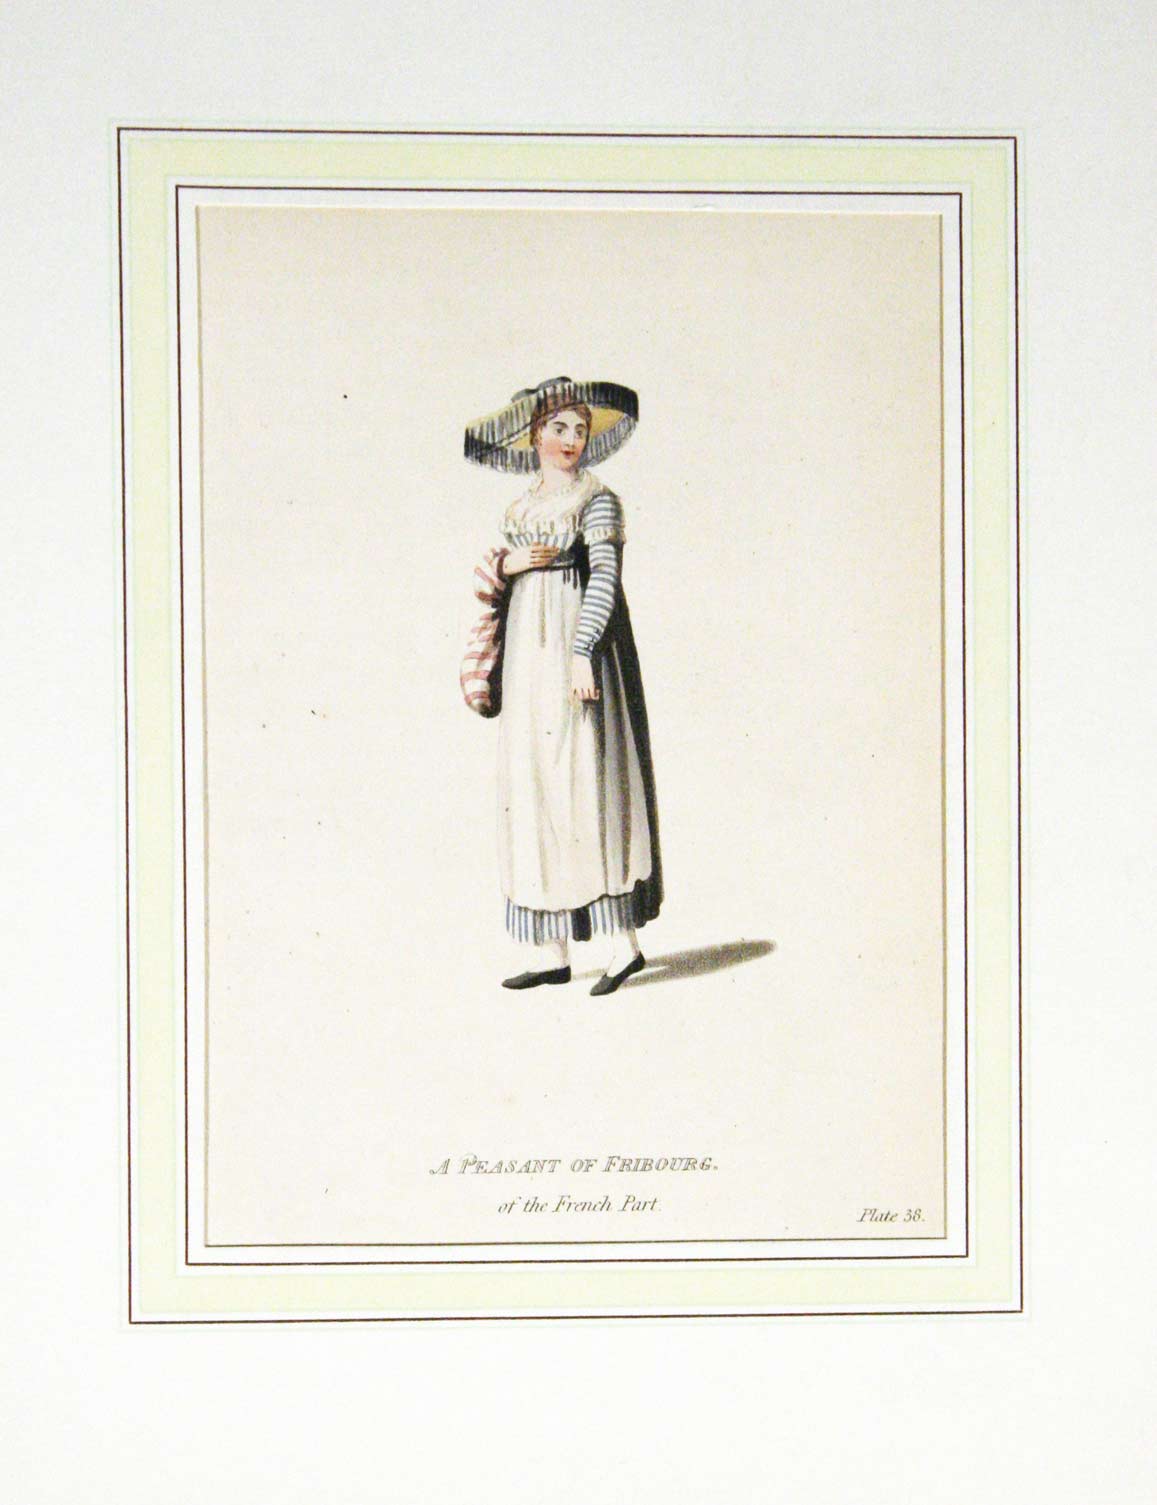  - Costume de Fribourg-Ville 'A peasant of Fribourg of the French Part'.